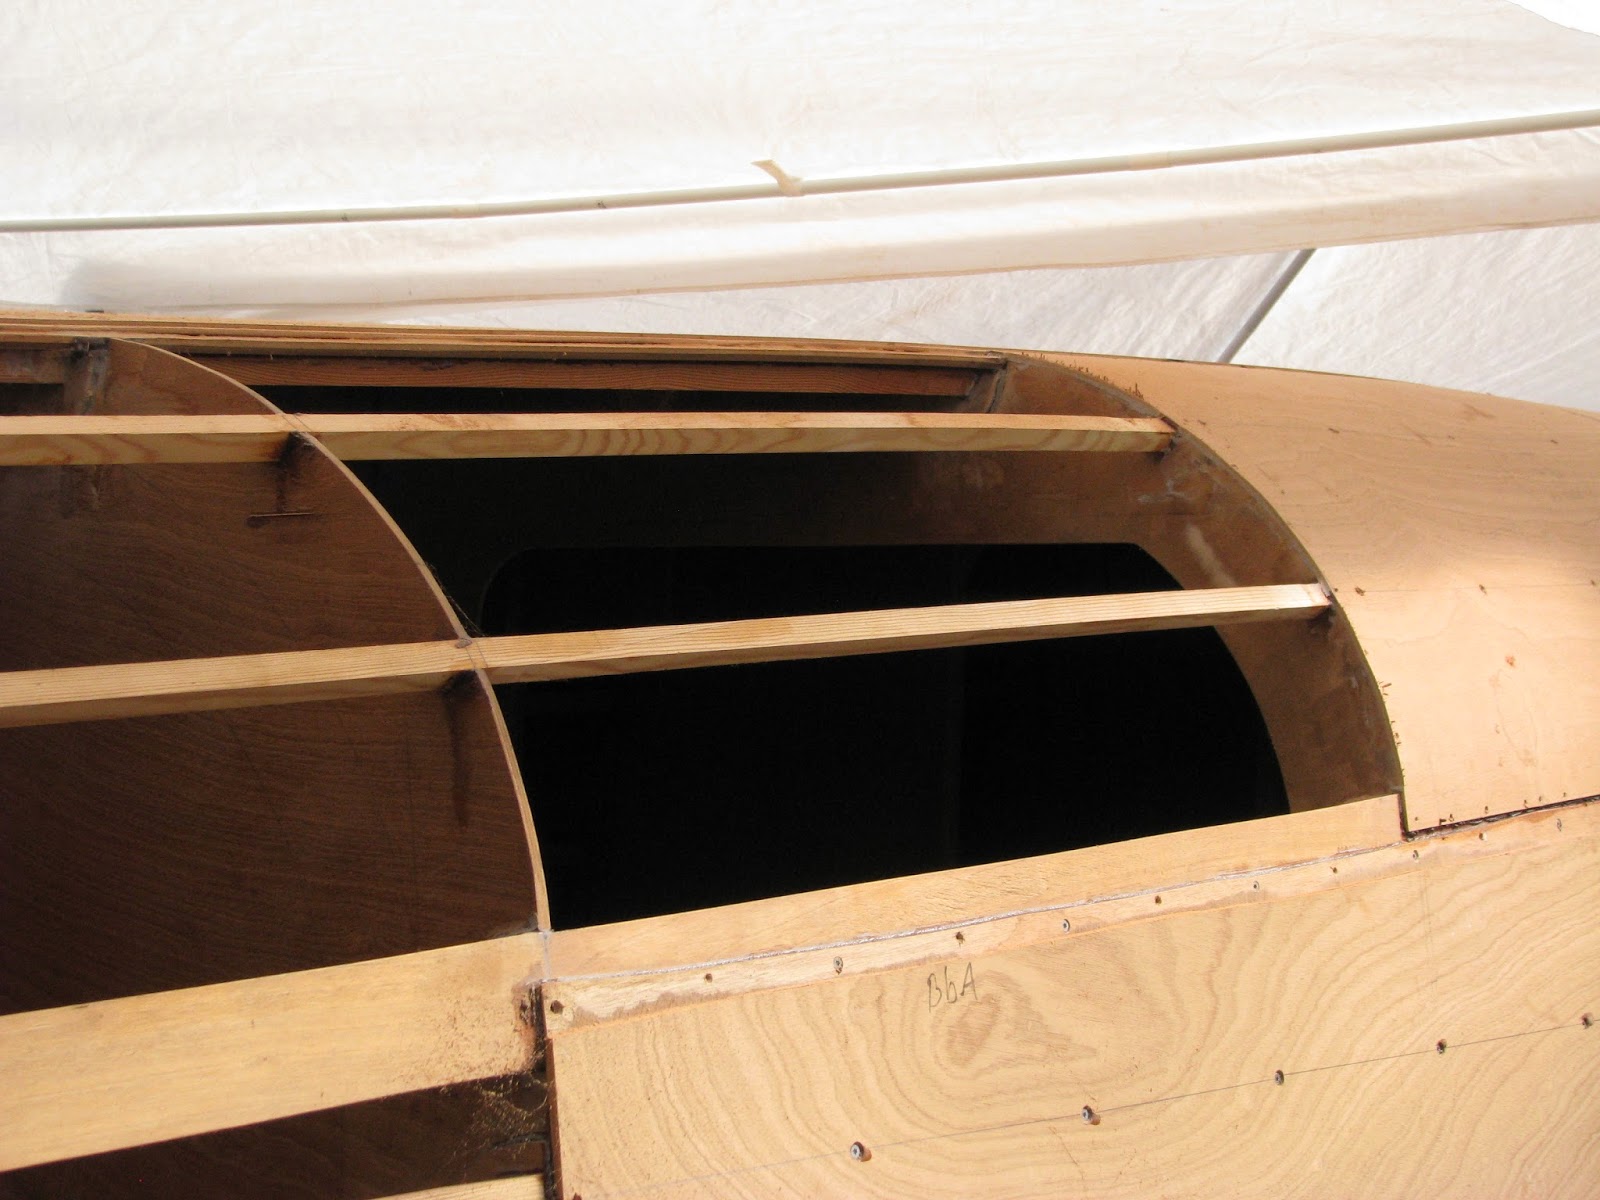 Wooden Boat Building Blog: 12 Steps for Planking A Radius ...